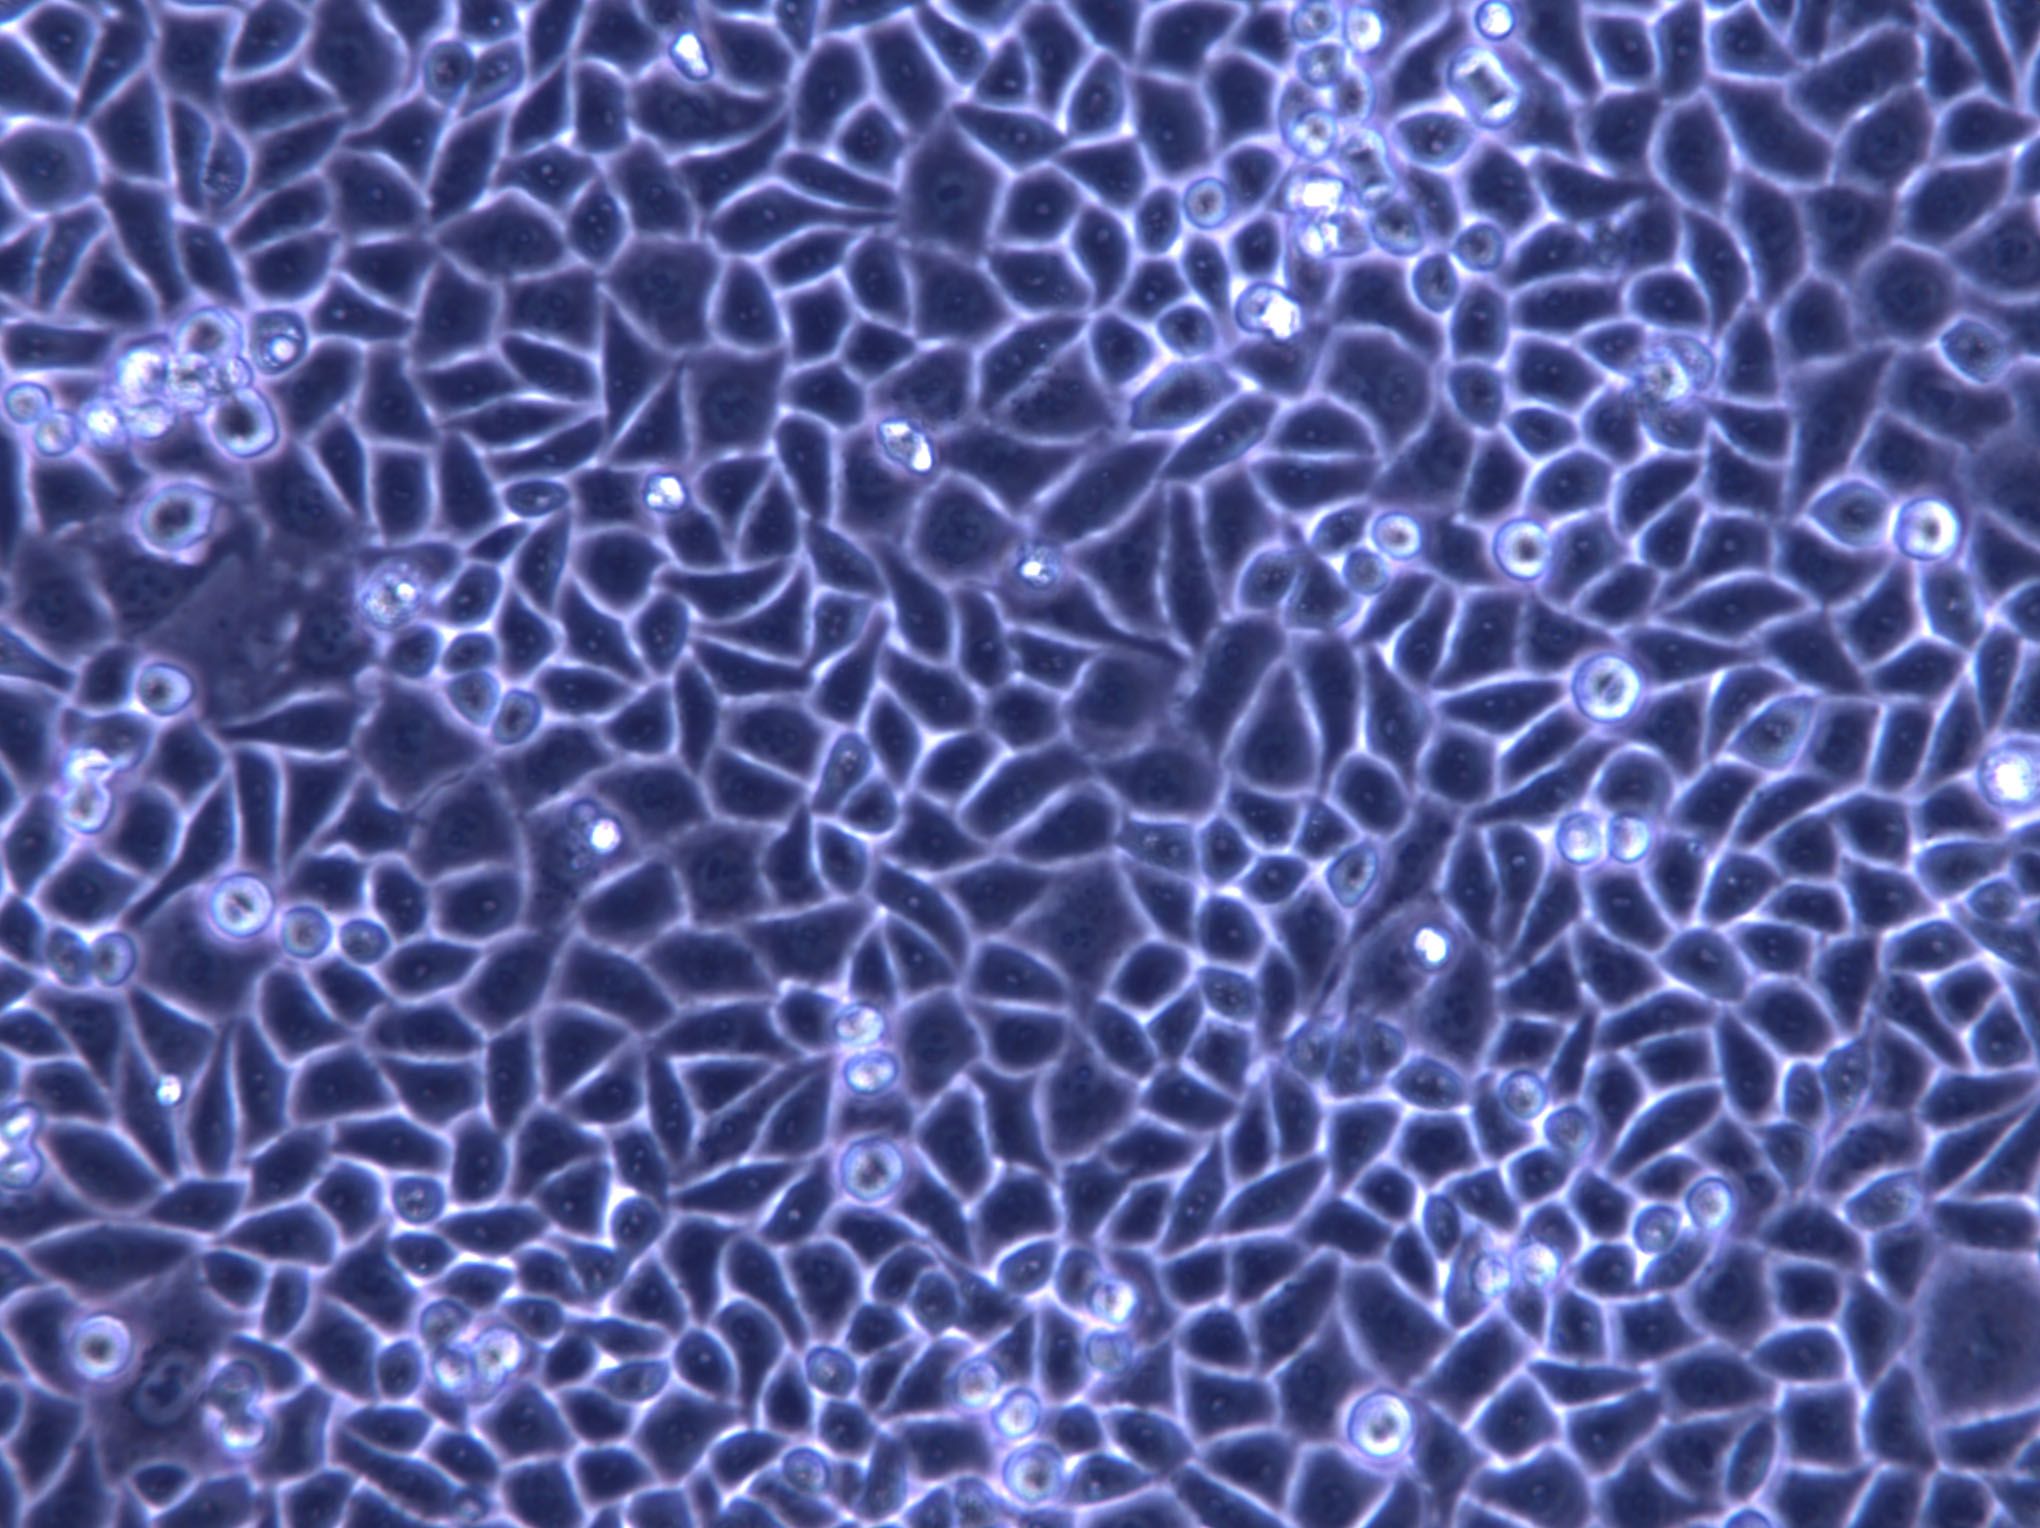 hFOB 1.19 Cells